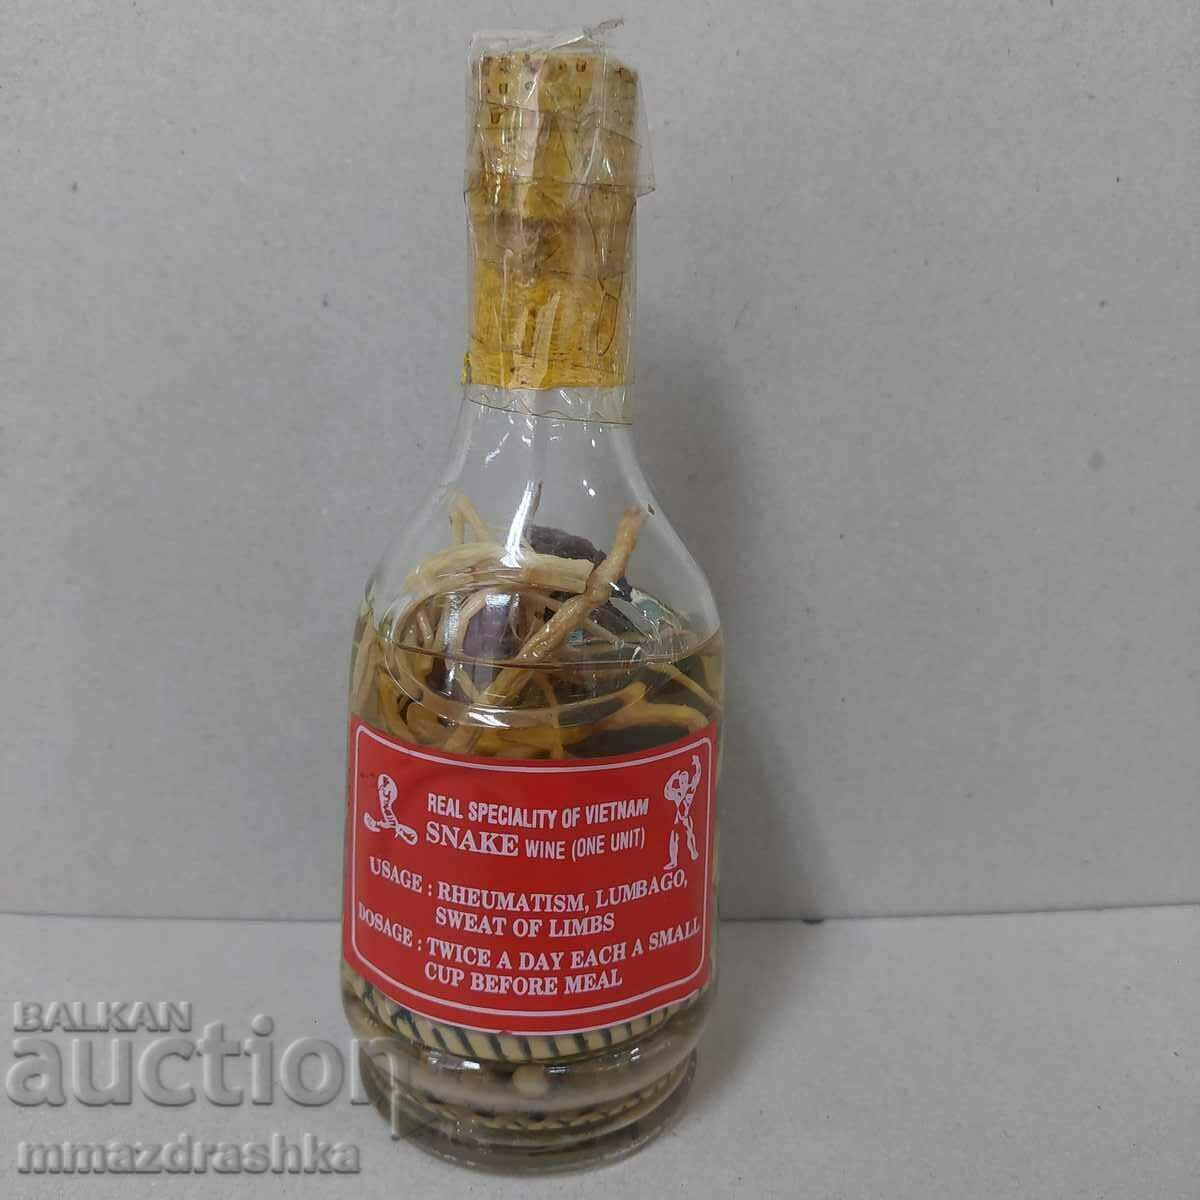 Vietnamese brandy with snakes, from the 1980s